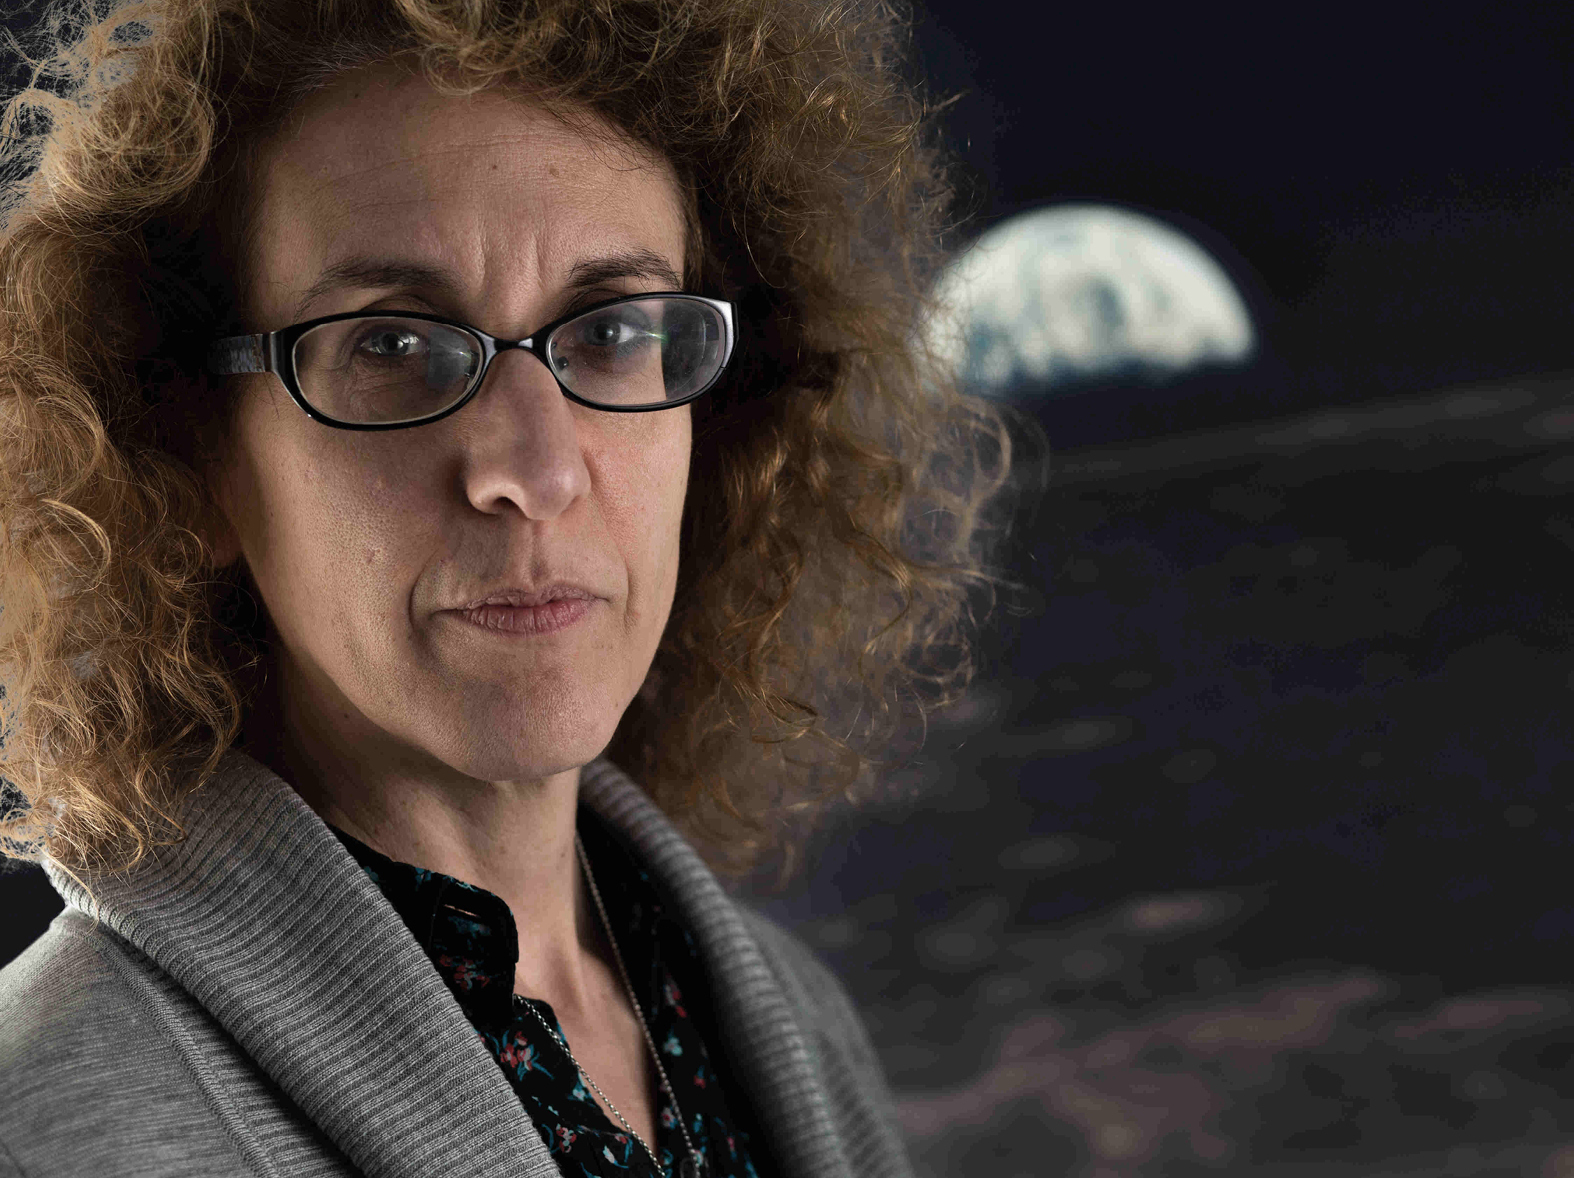 Professor Vicky Kaspi looking into the camera standing in front of a poster of the moon